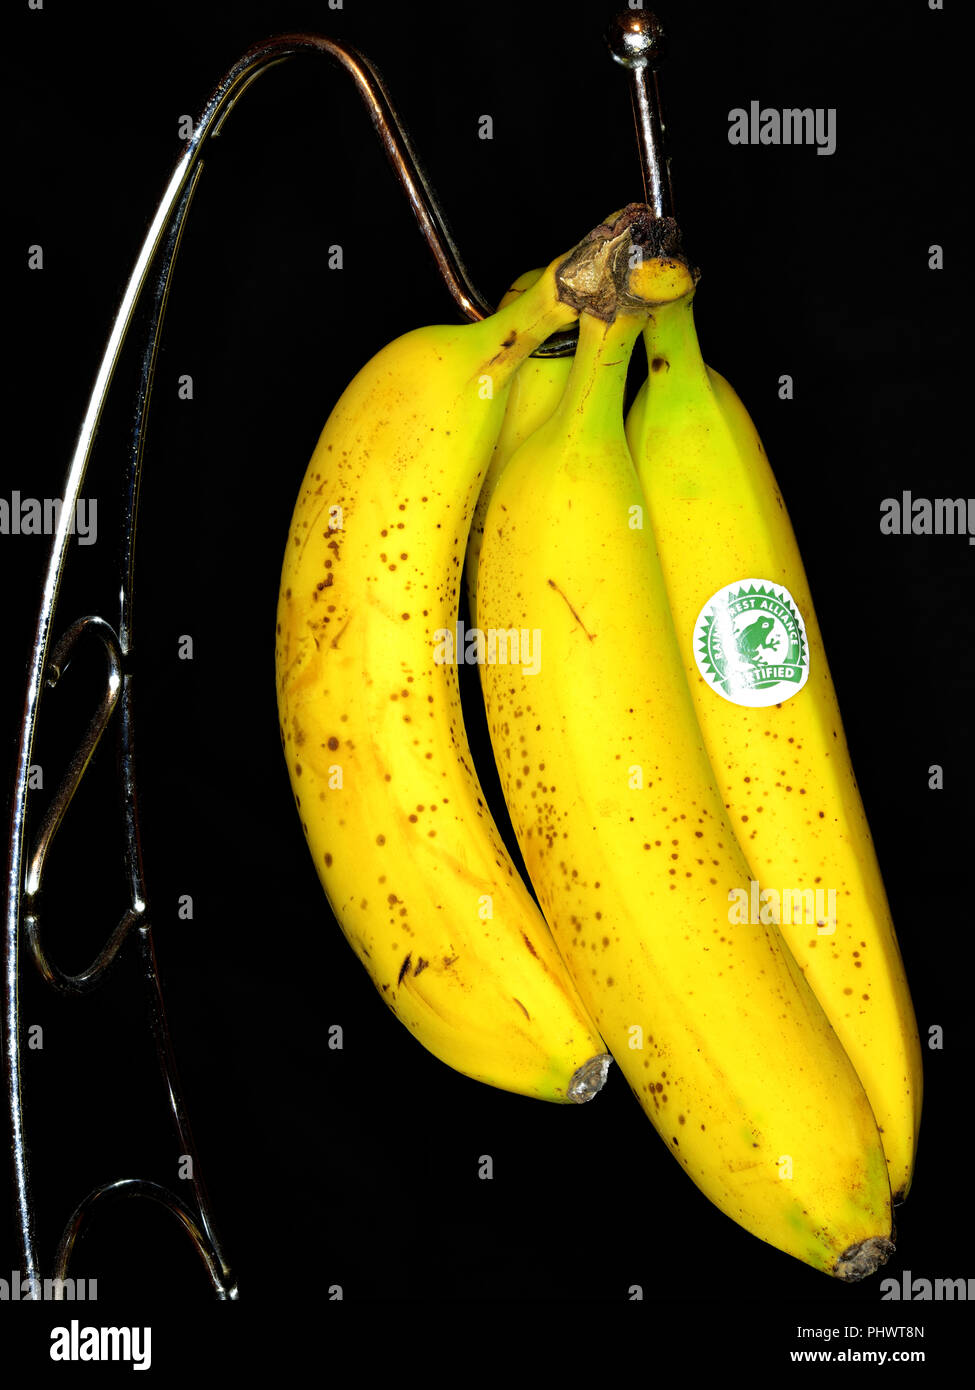 Four yellow green bananas hung on a chrome hook against a black background Stock Photo